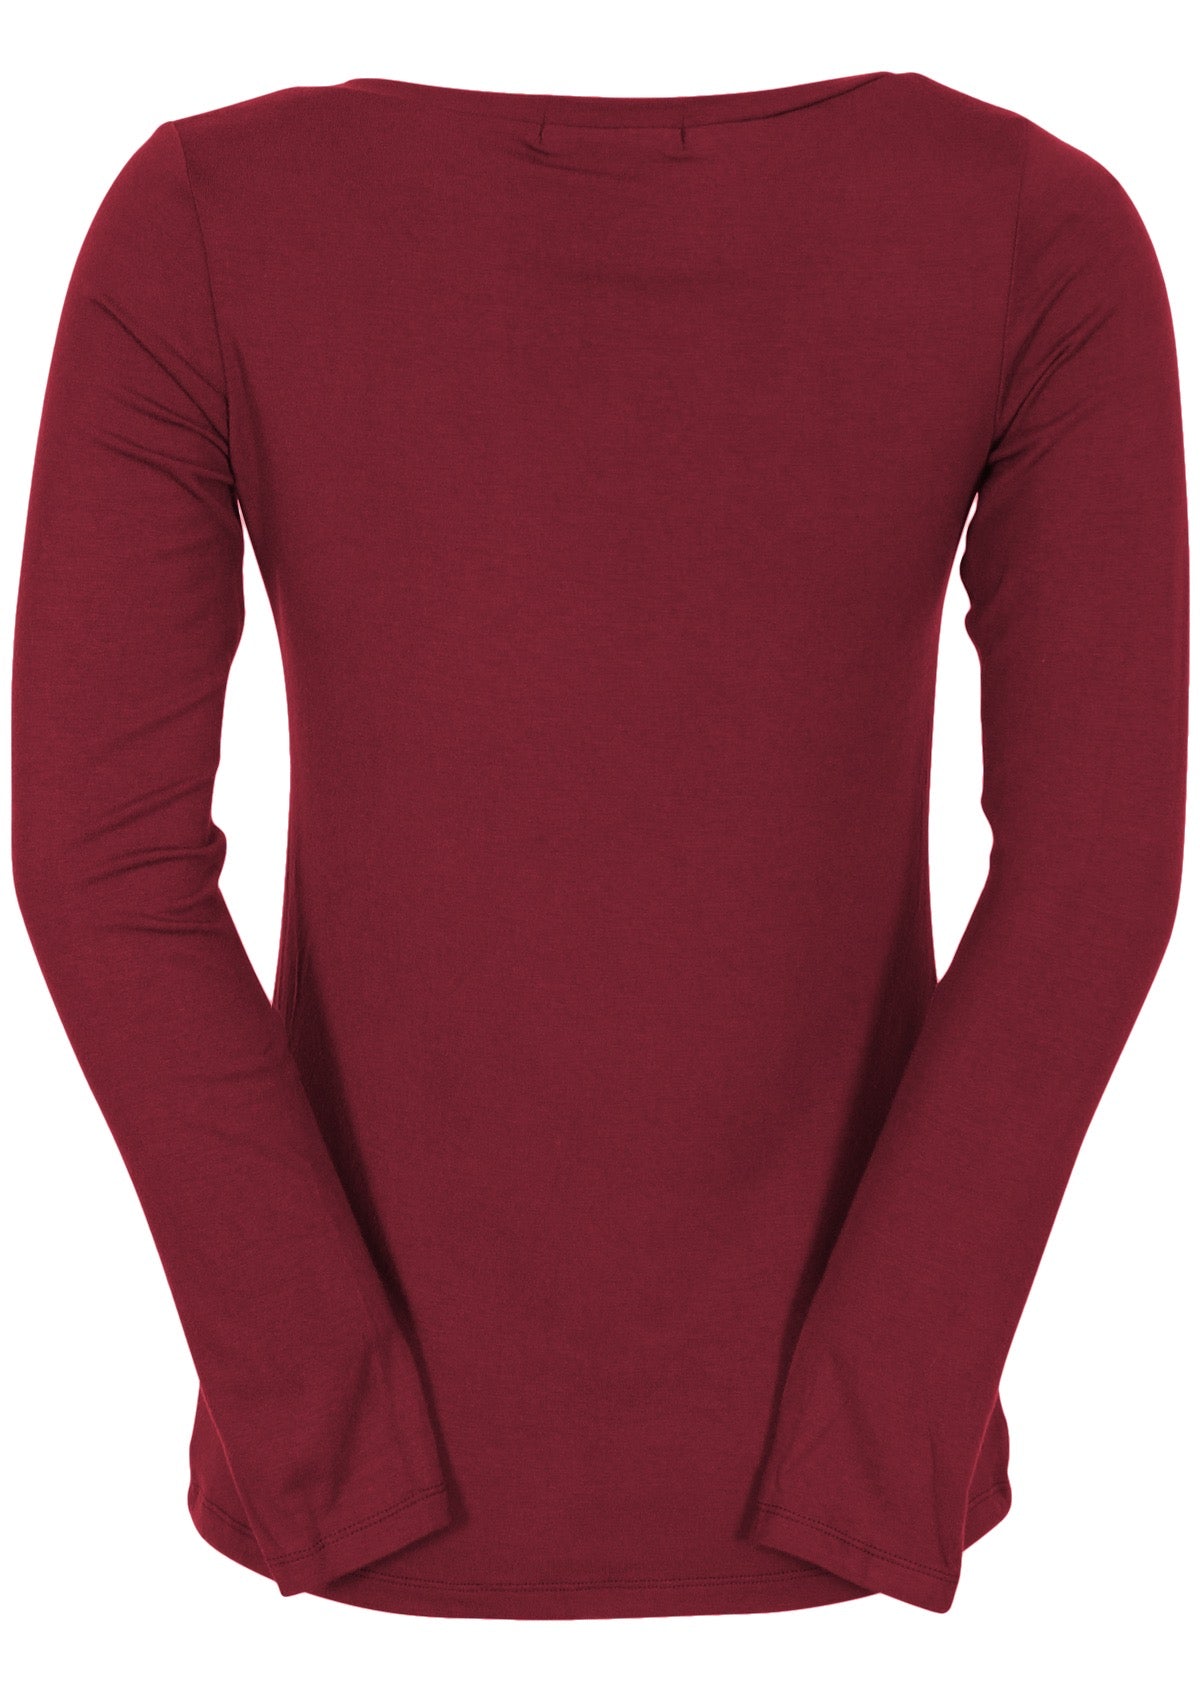 back view fitted women's basic maroon